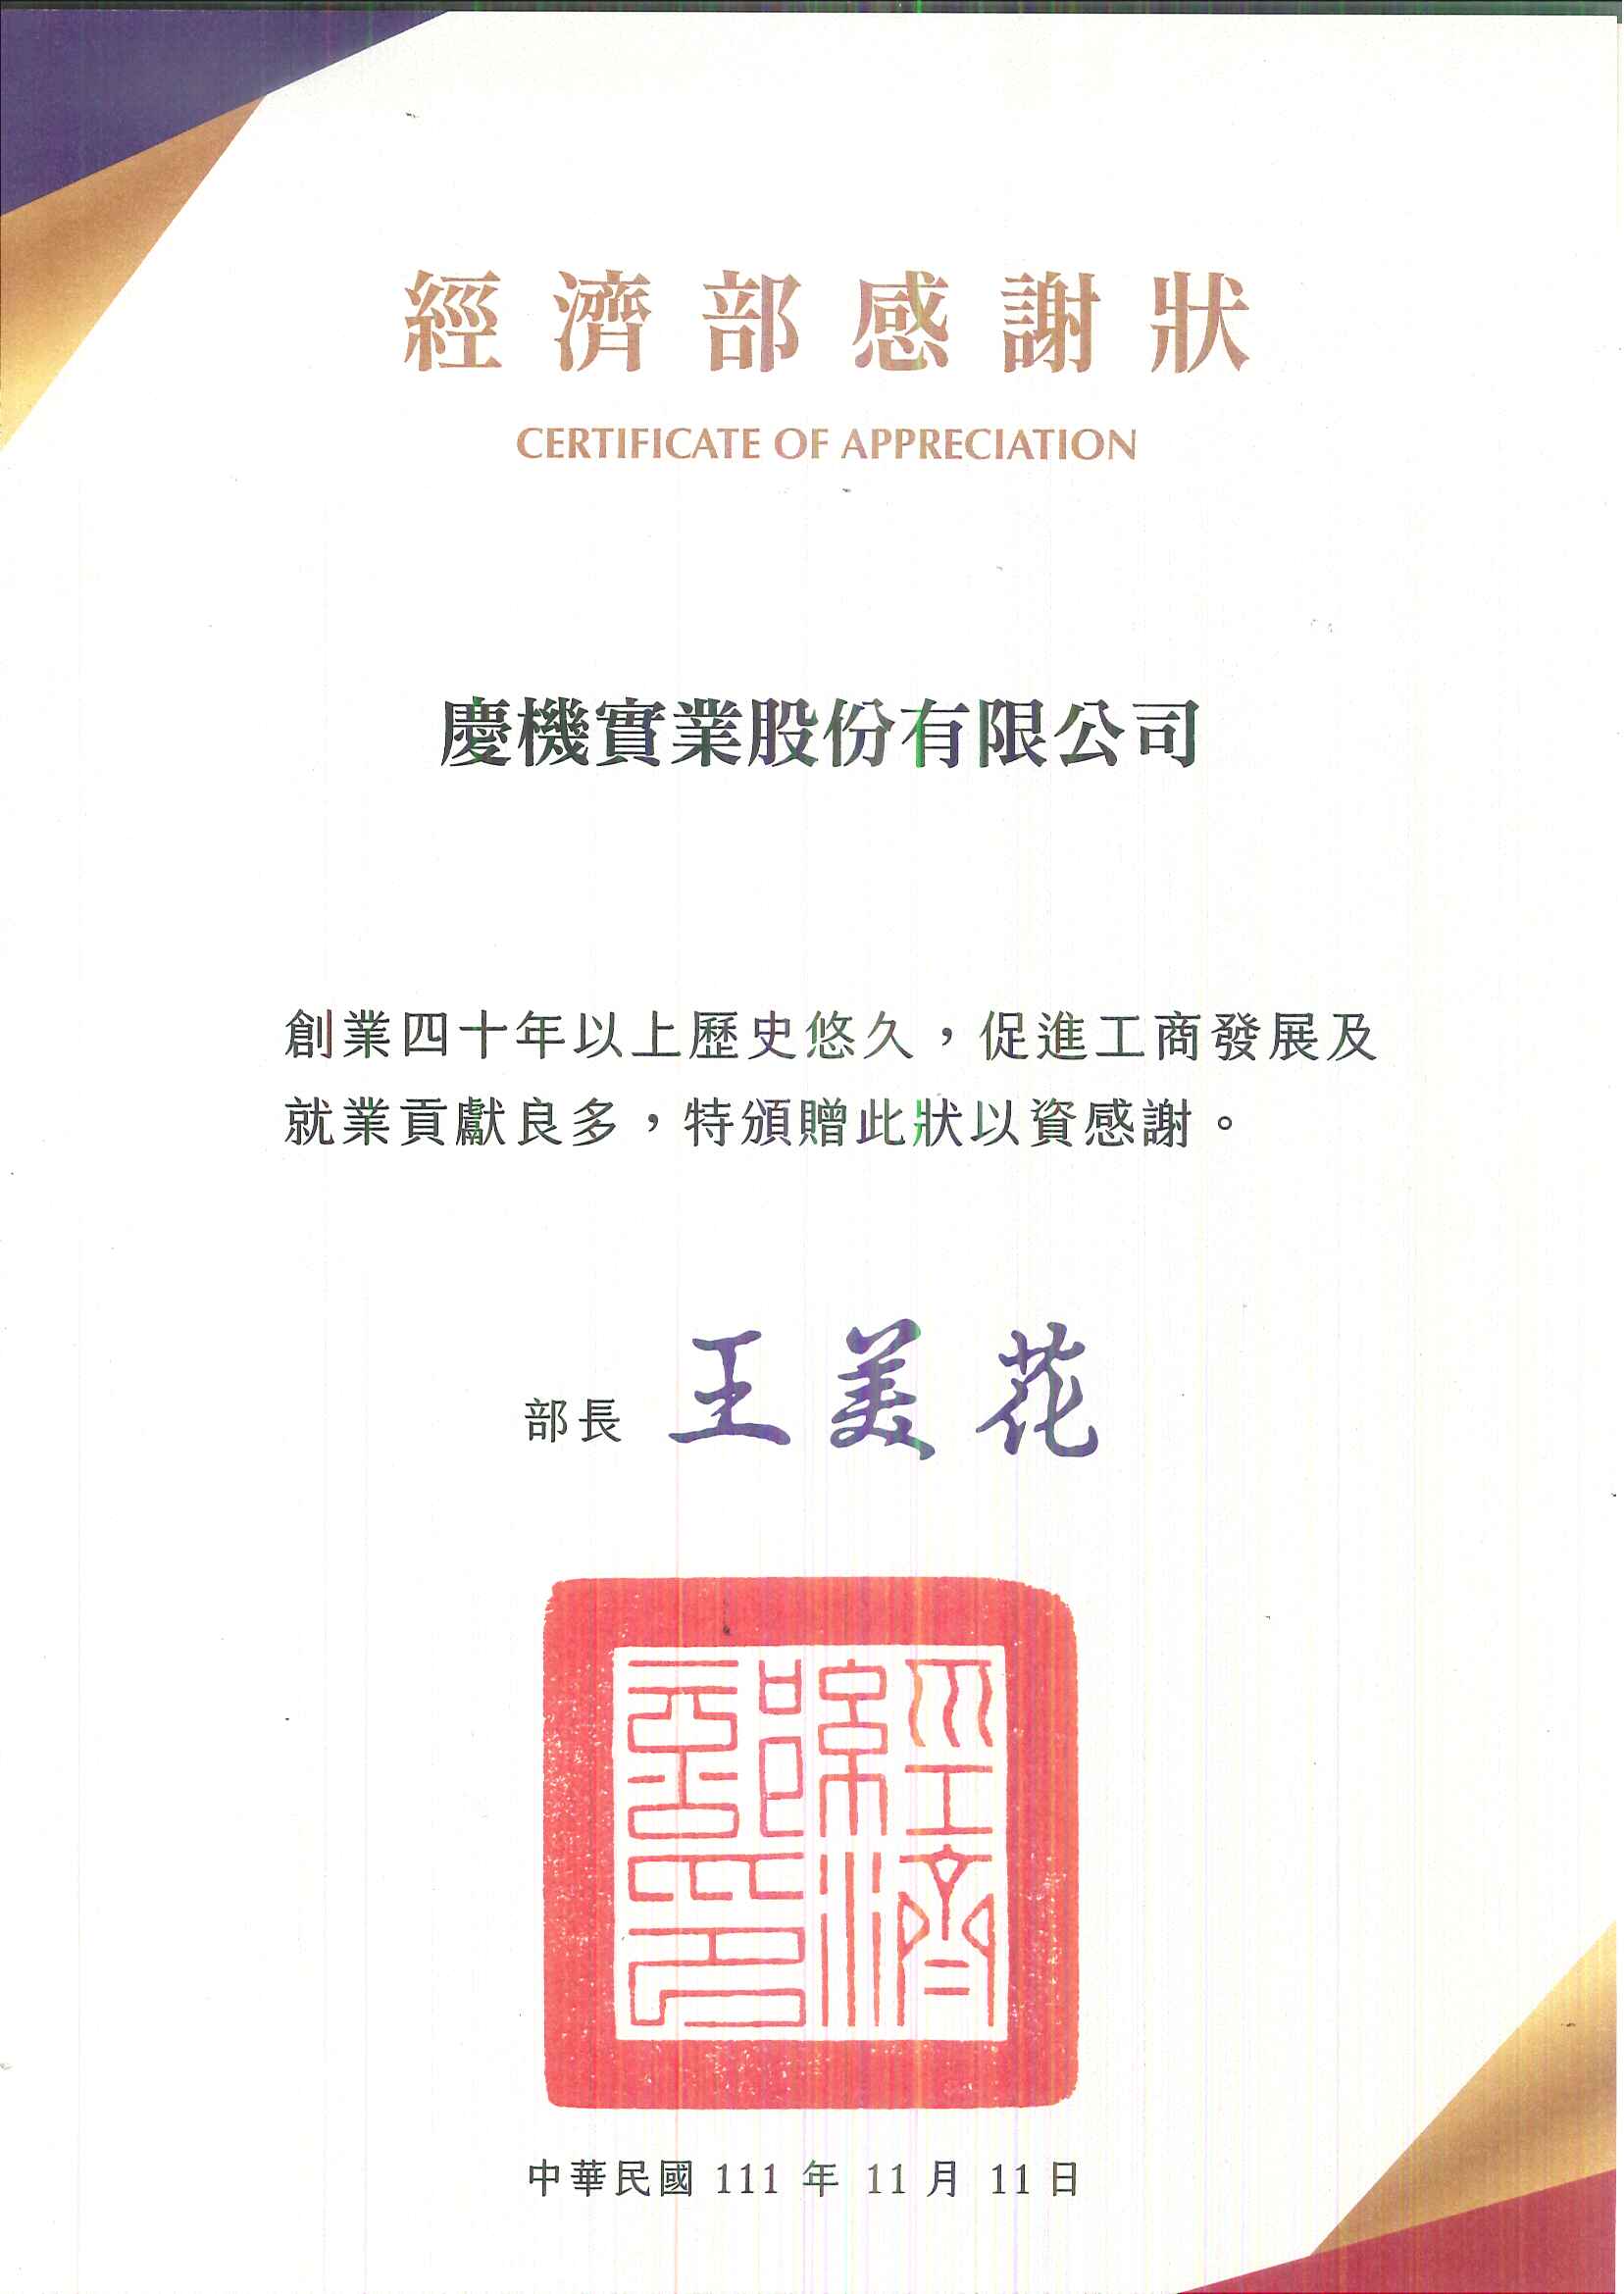 Certificate of Appreciation from the Ministry of Economic Affairs in 111